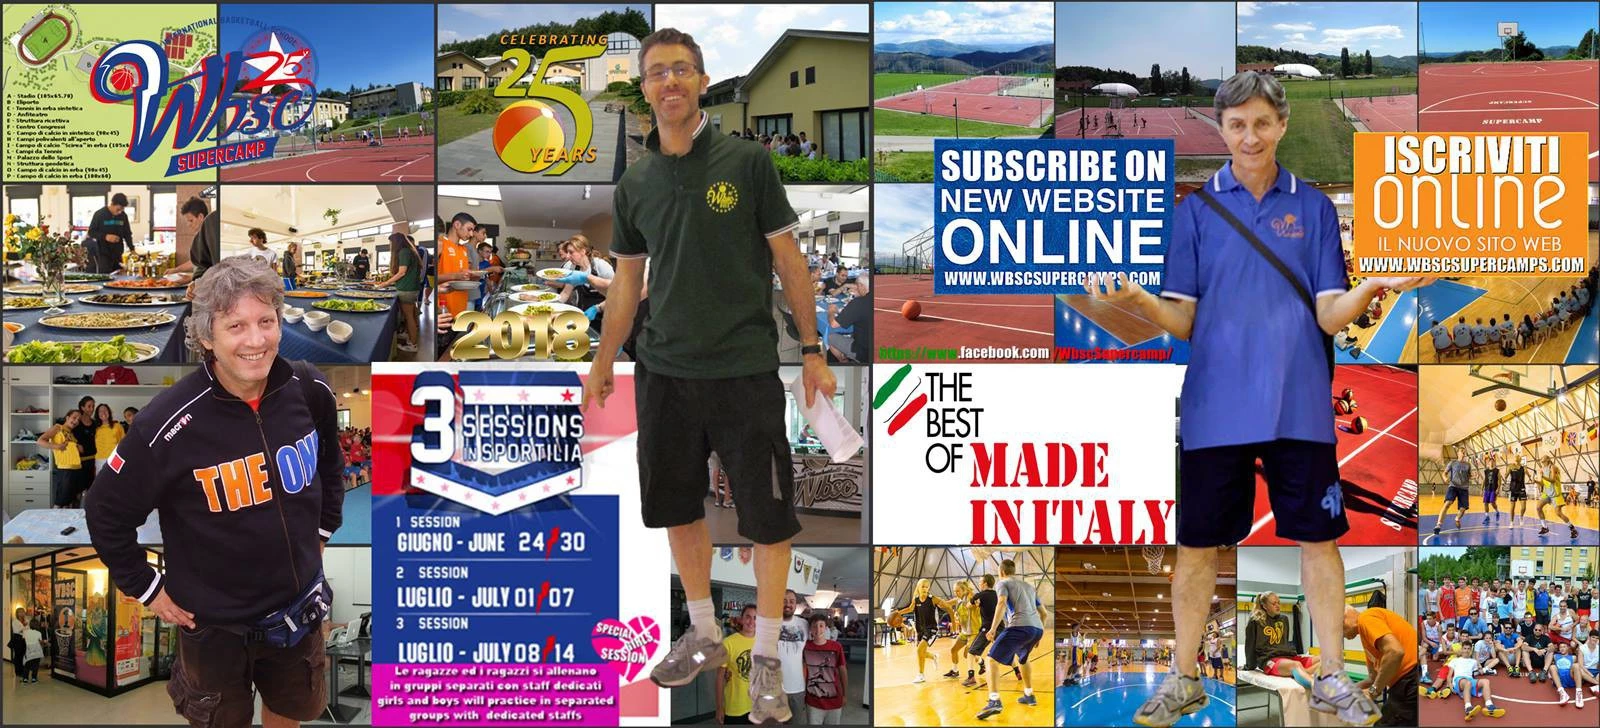 25° WBSC Supercamp Italy 2018 registrations!!